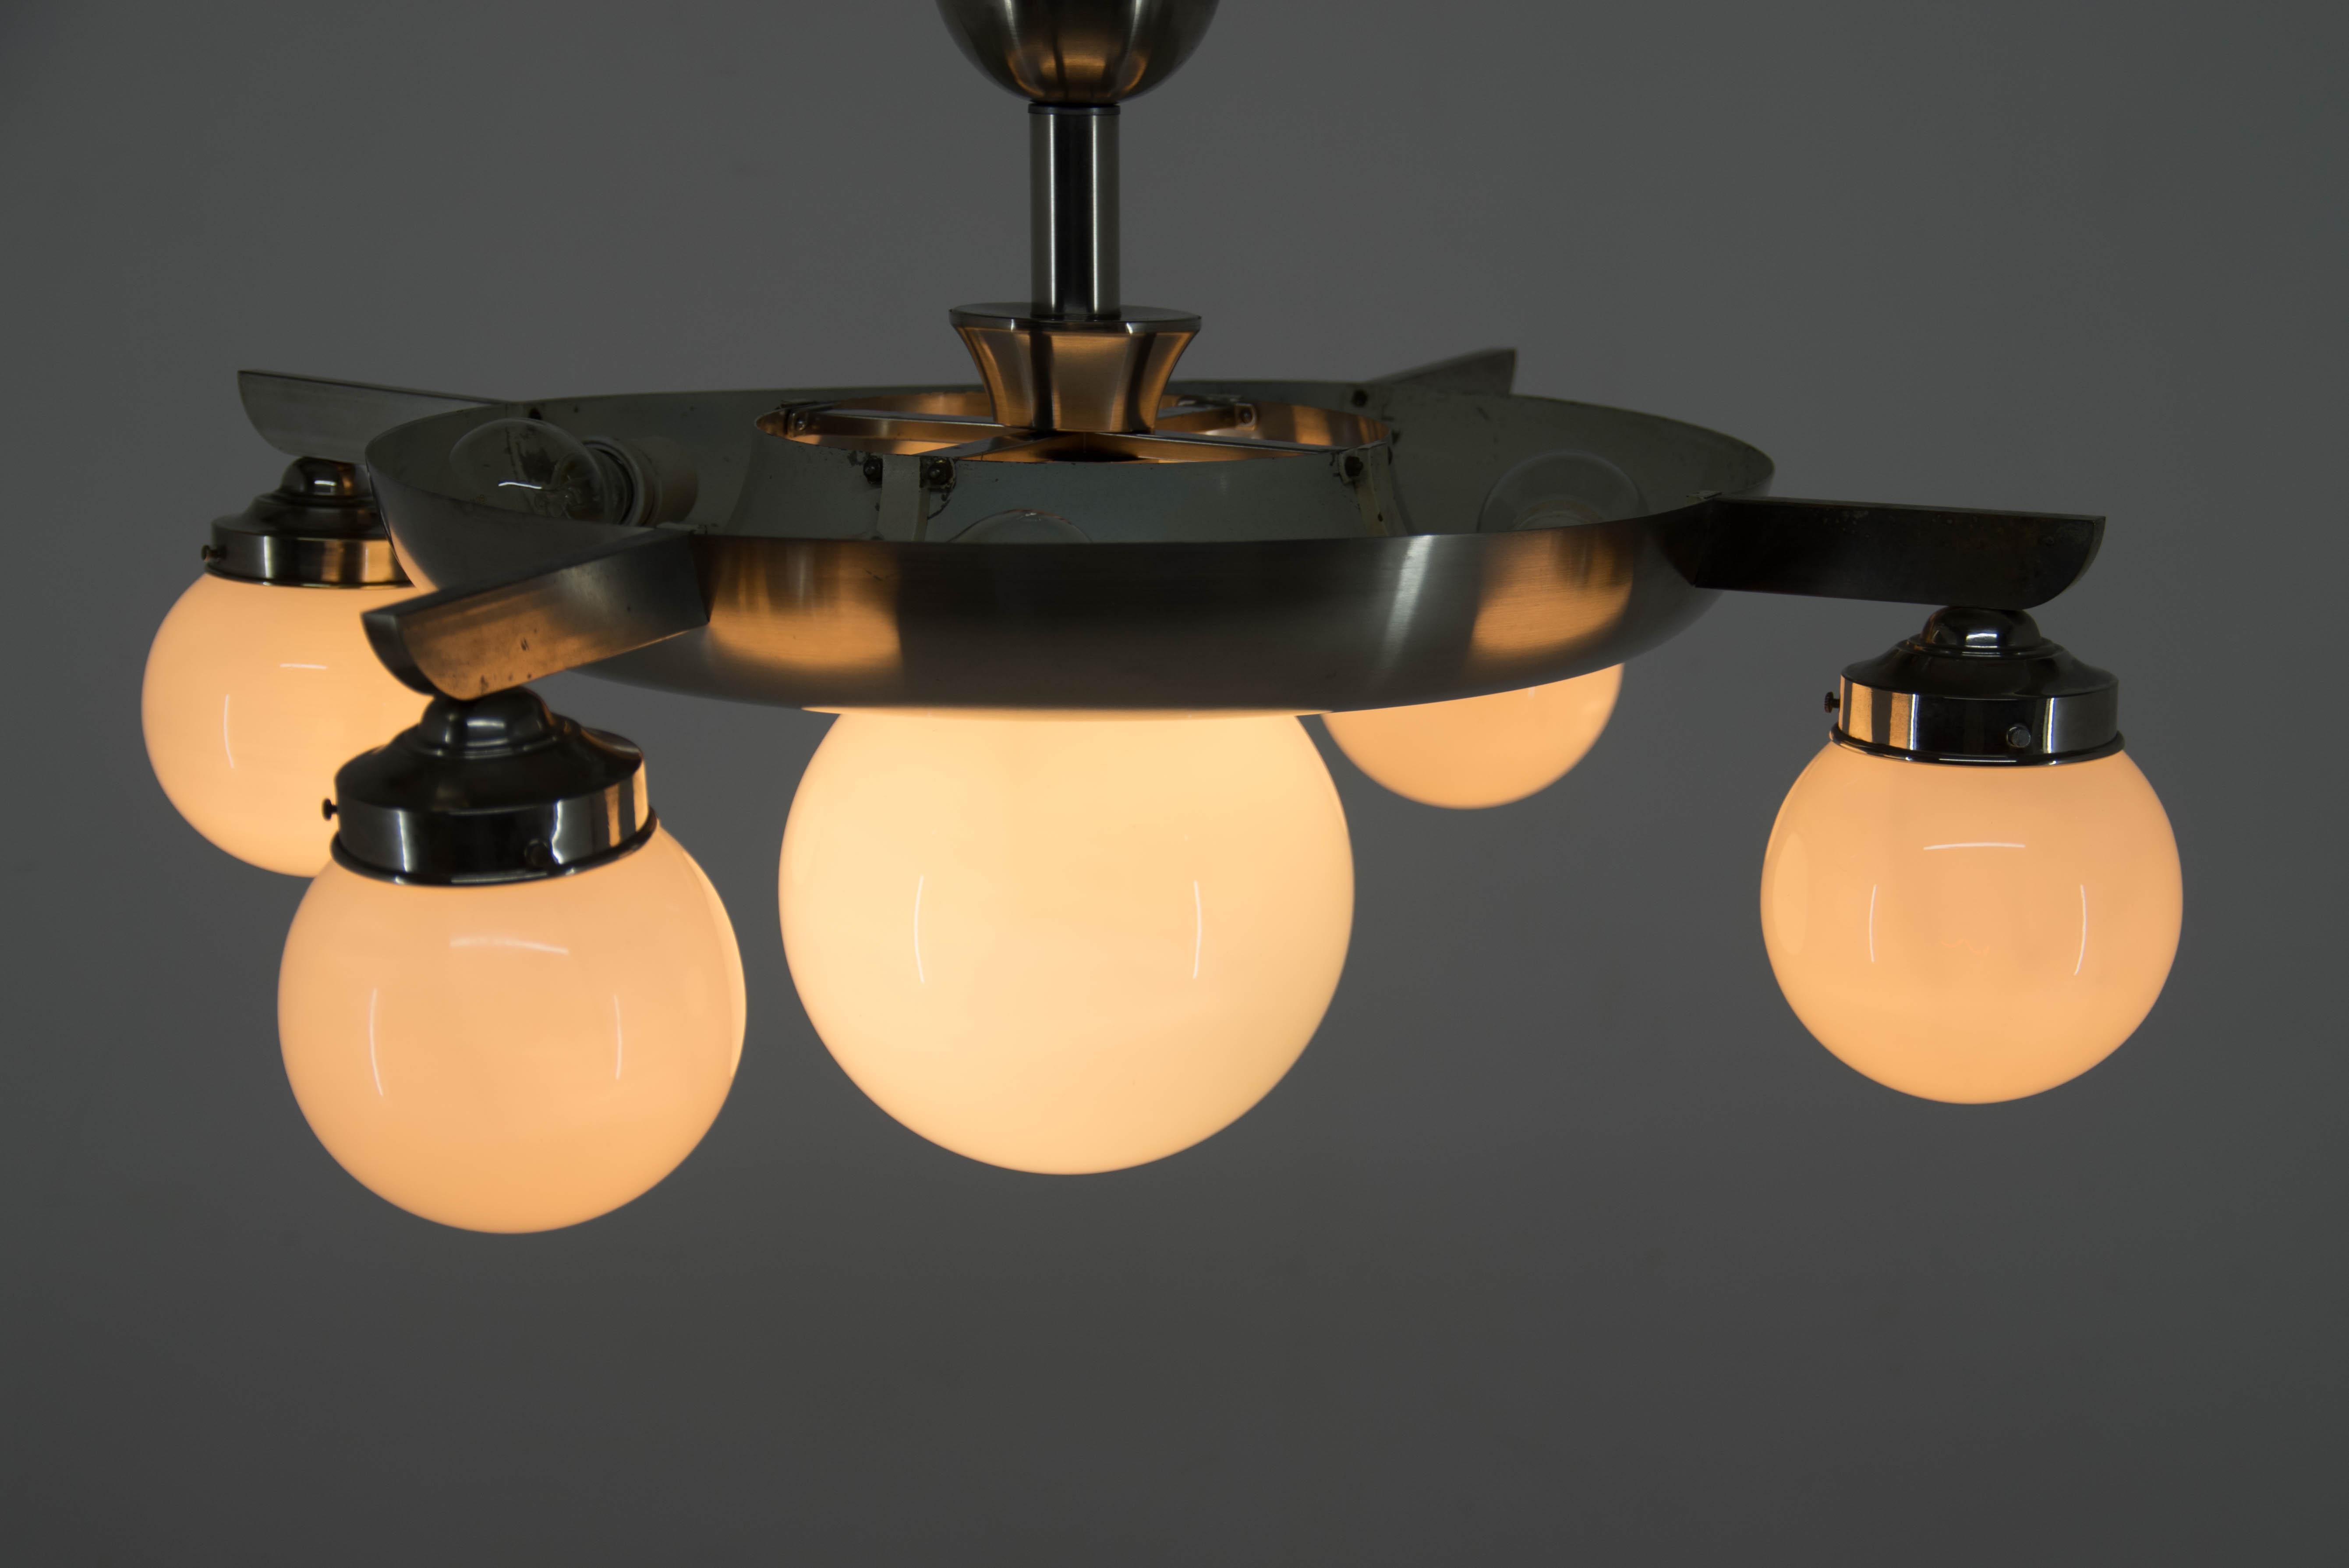 Rare Functionalism or Bauhaus Chandelier by IAS, 1920s For Sale 10